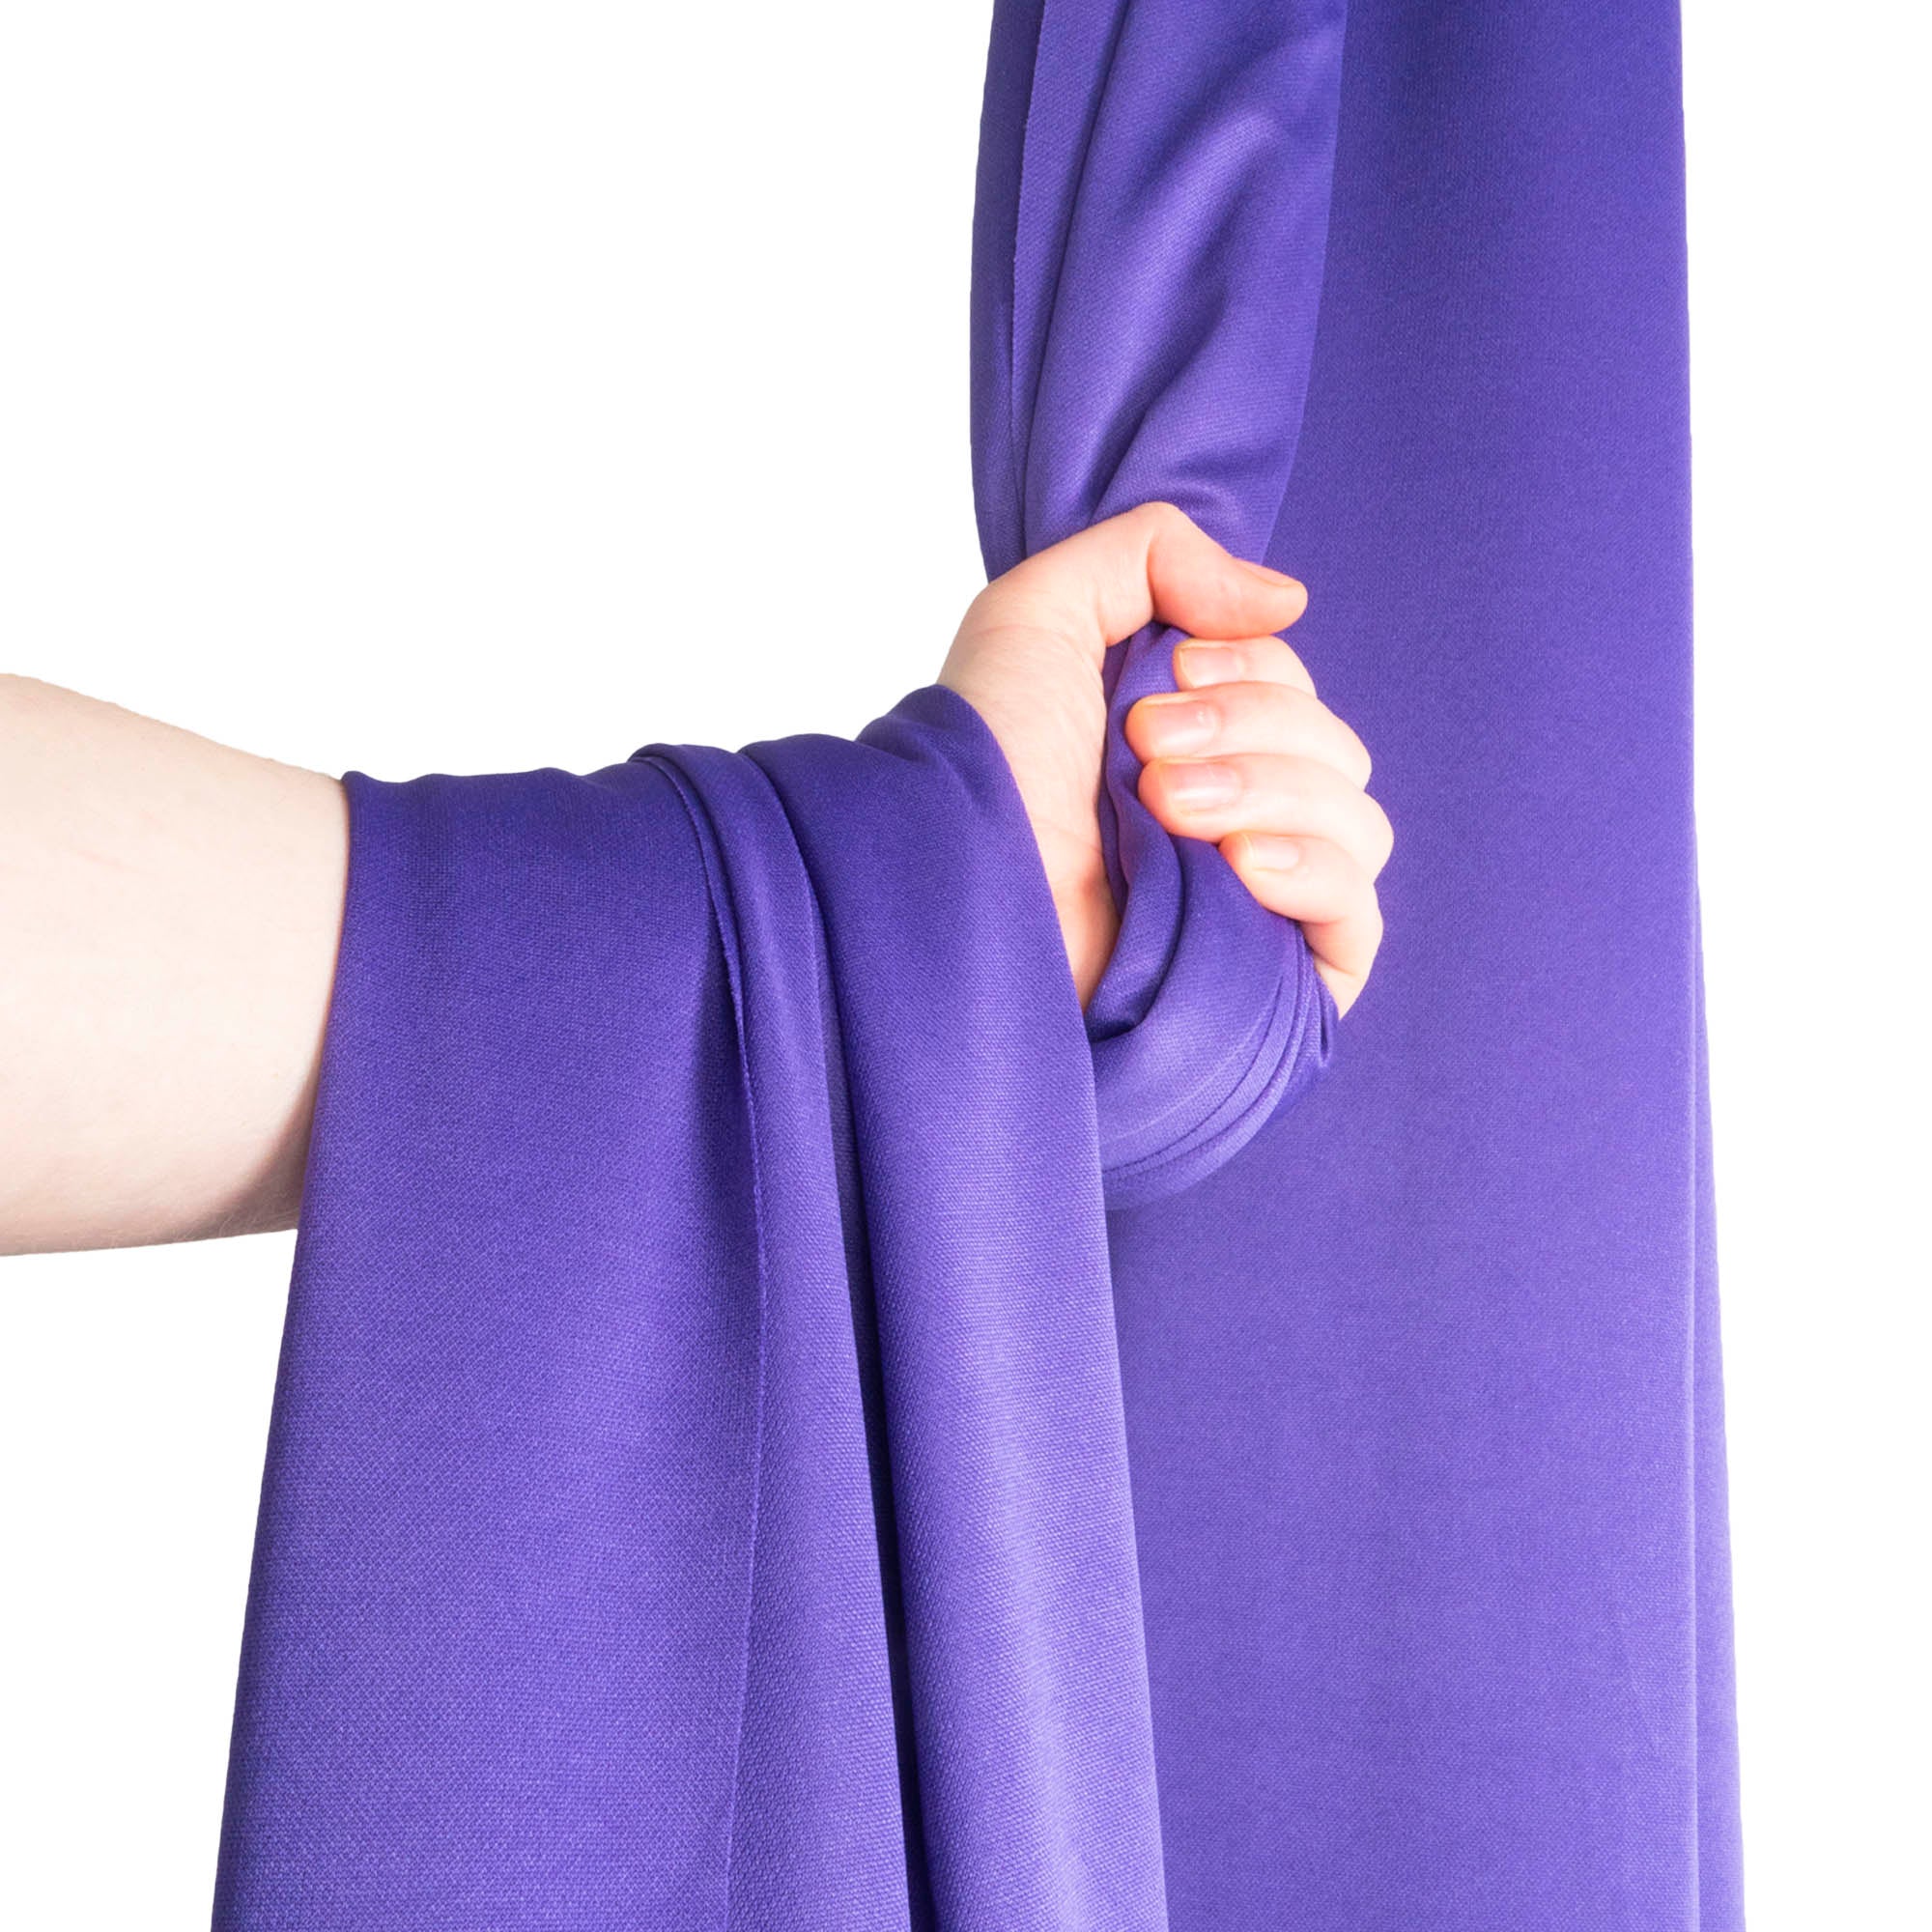 Firetoys youth aerial silk purple wrapped over hand